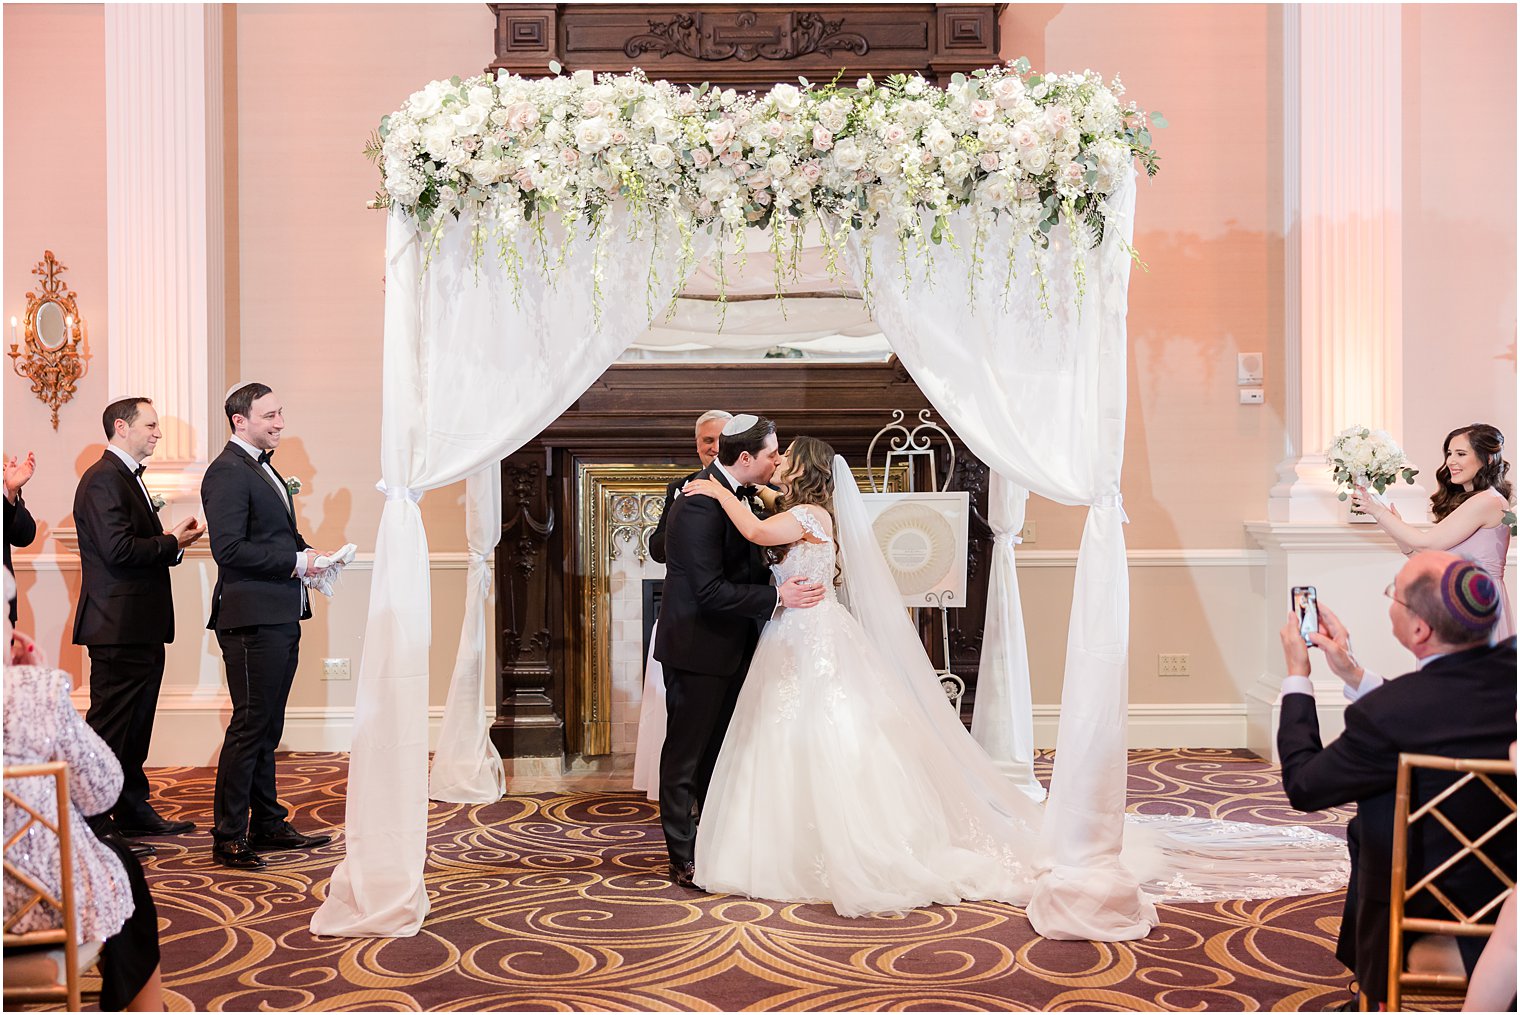 newlyweds kiss under canopy with white flowers during traditional Jewish wedding at the Palace at Somerset Park